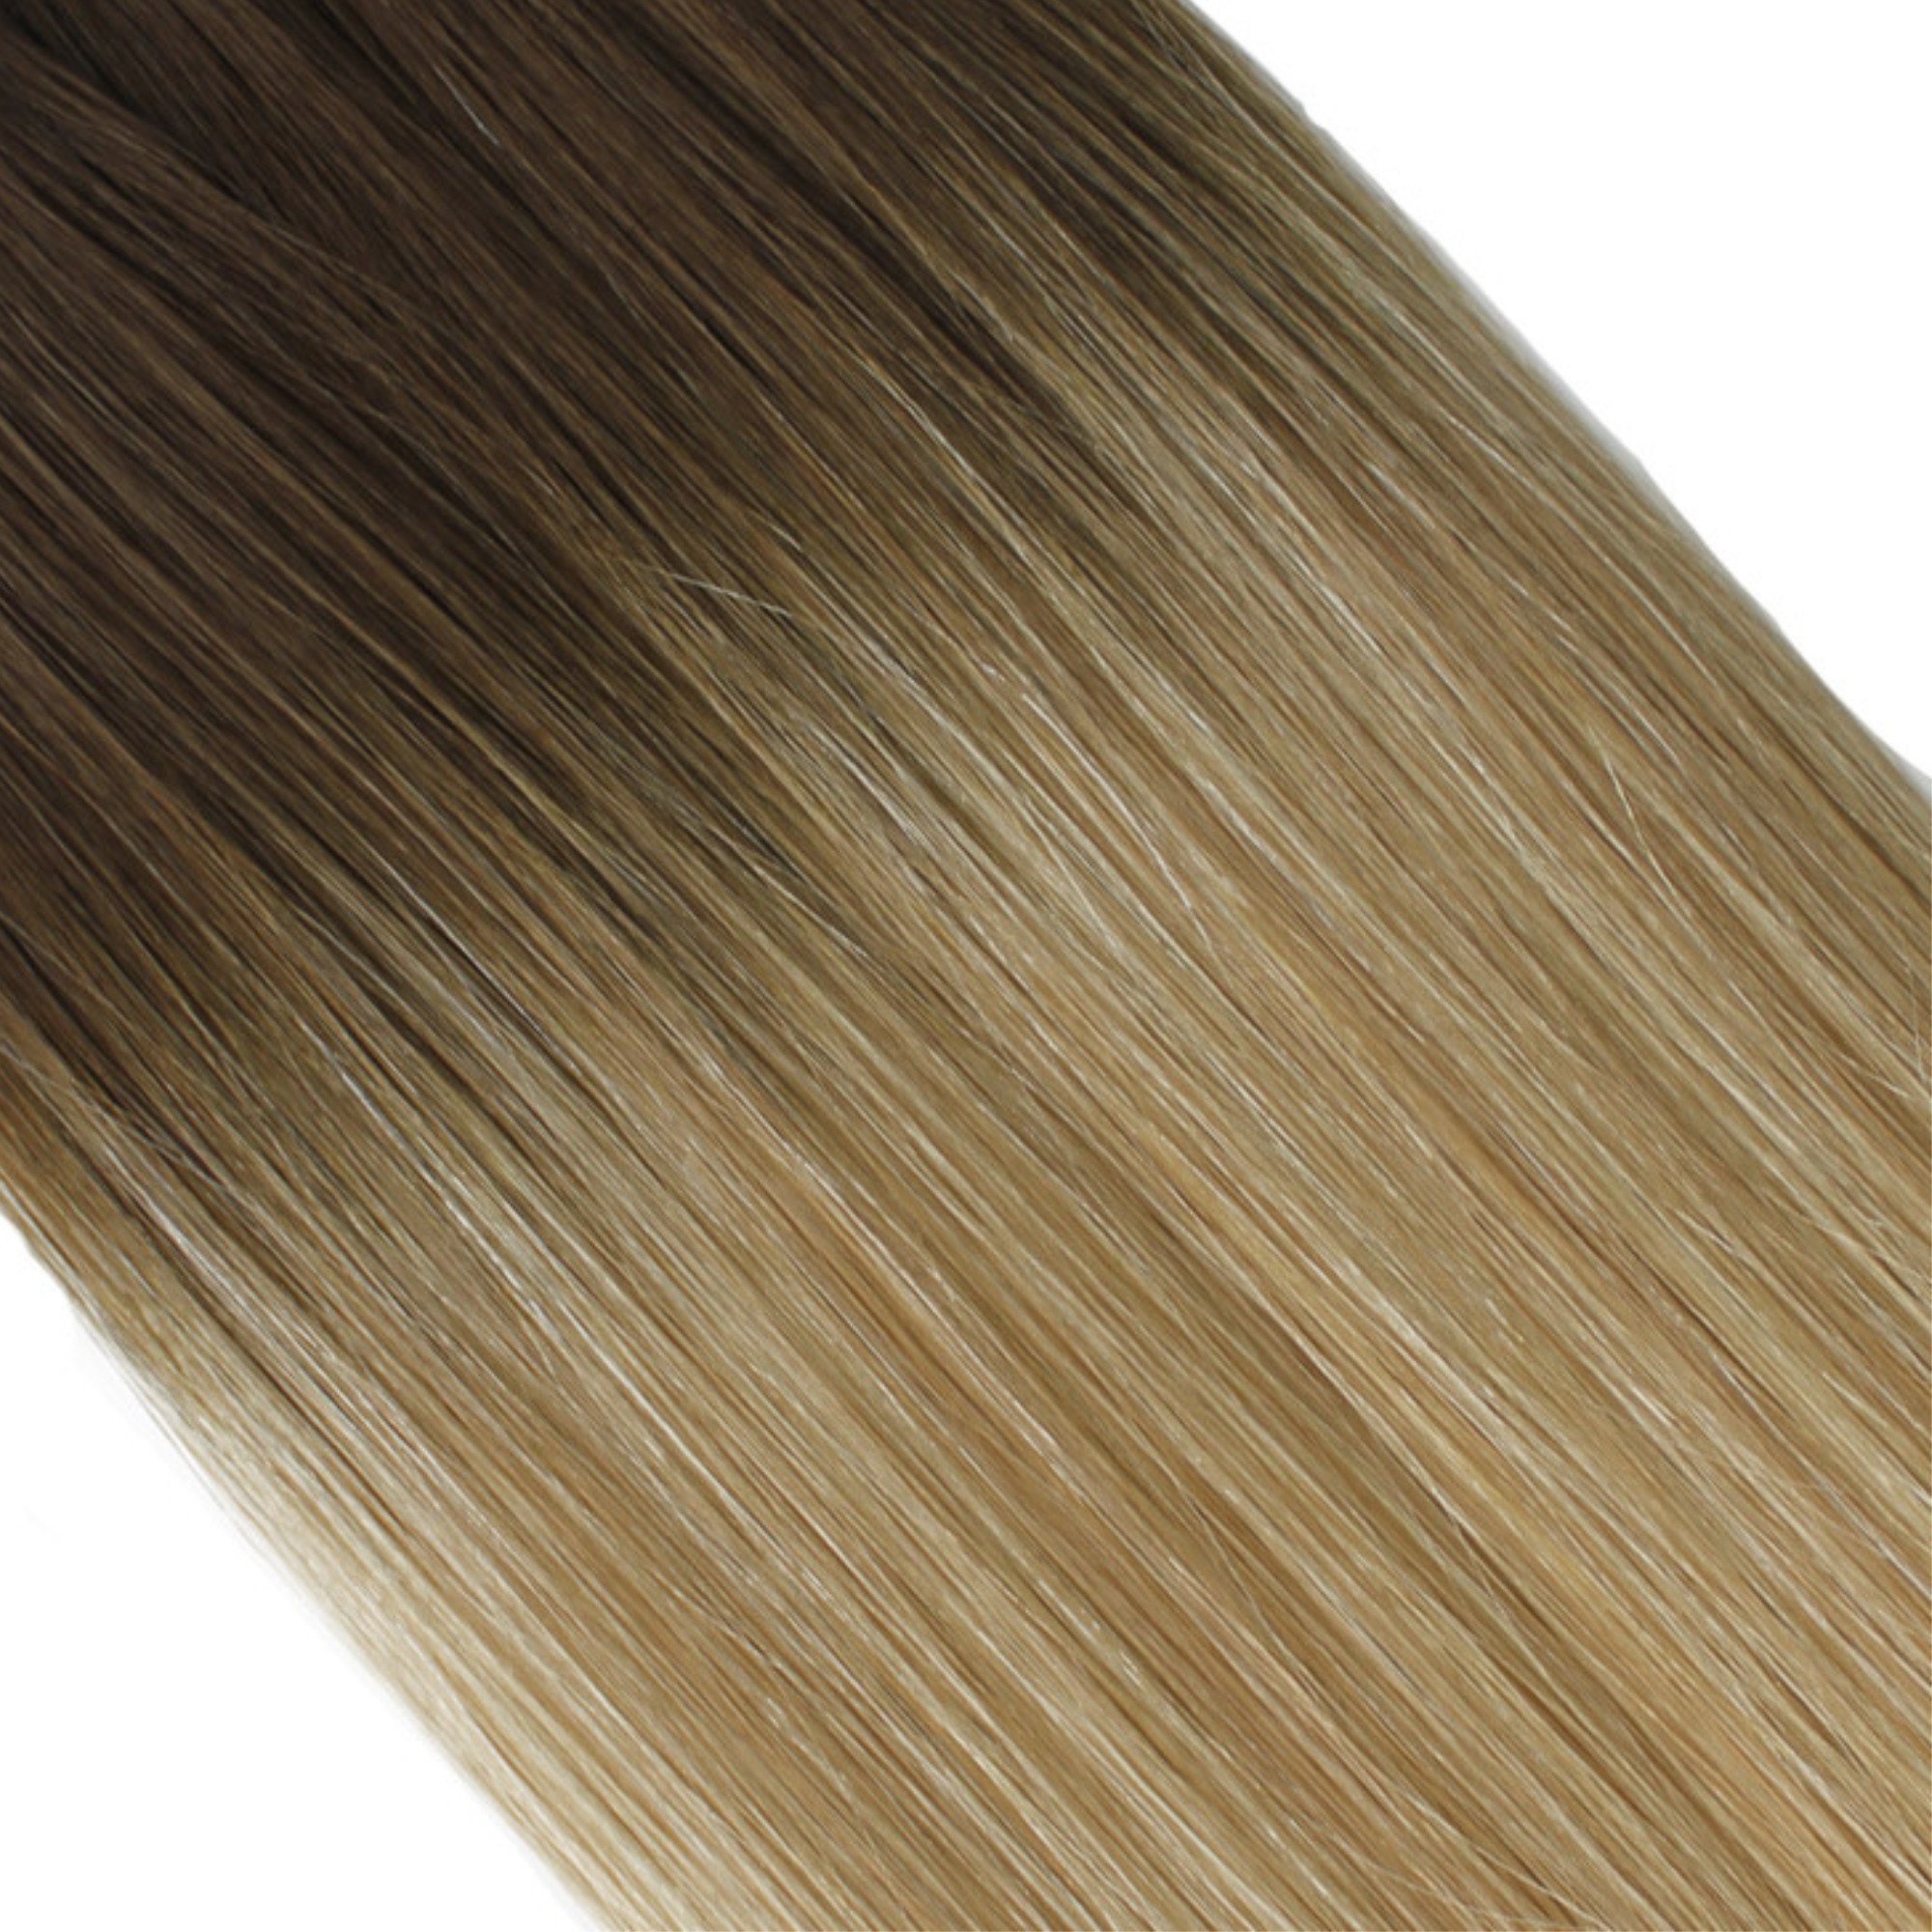 "hair rehab london 18" tape hair extensions shade swatch titled rooted coachella"